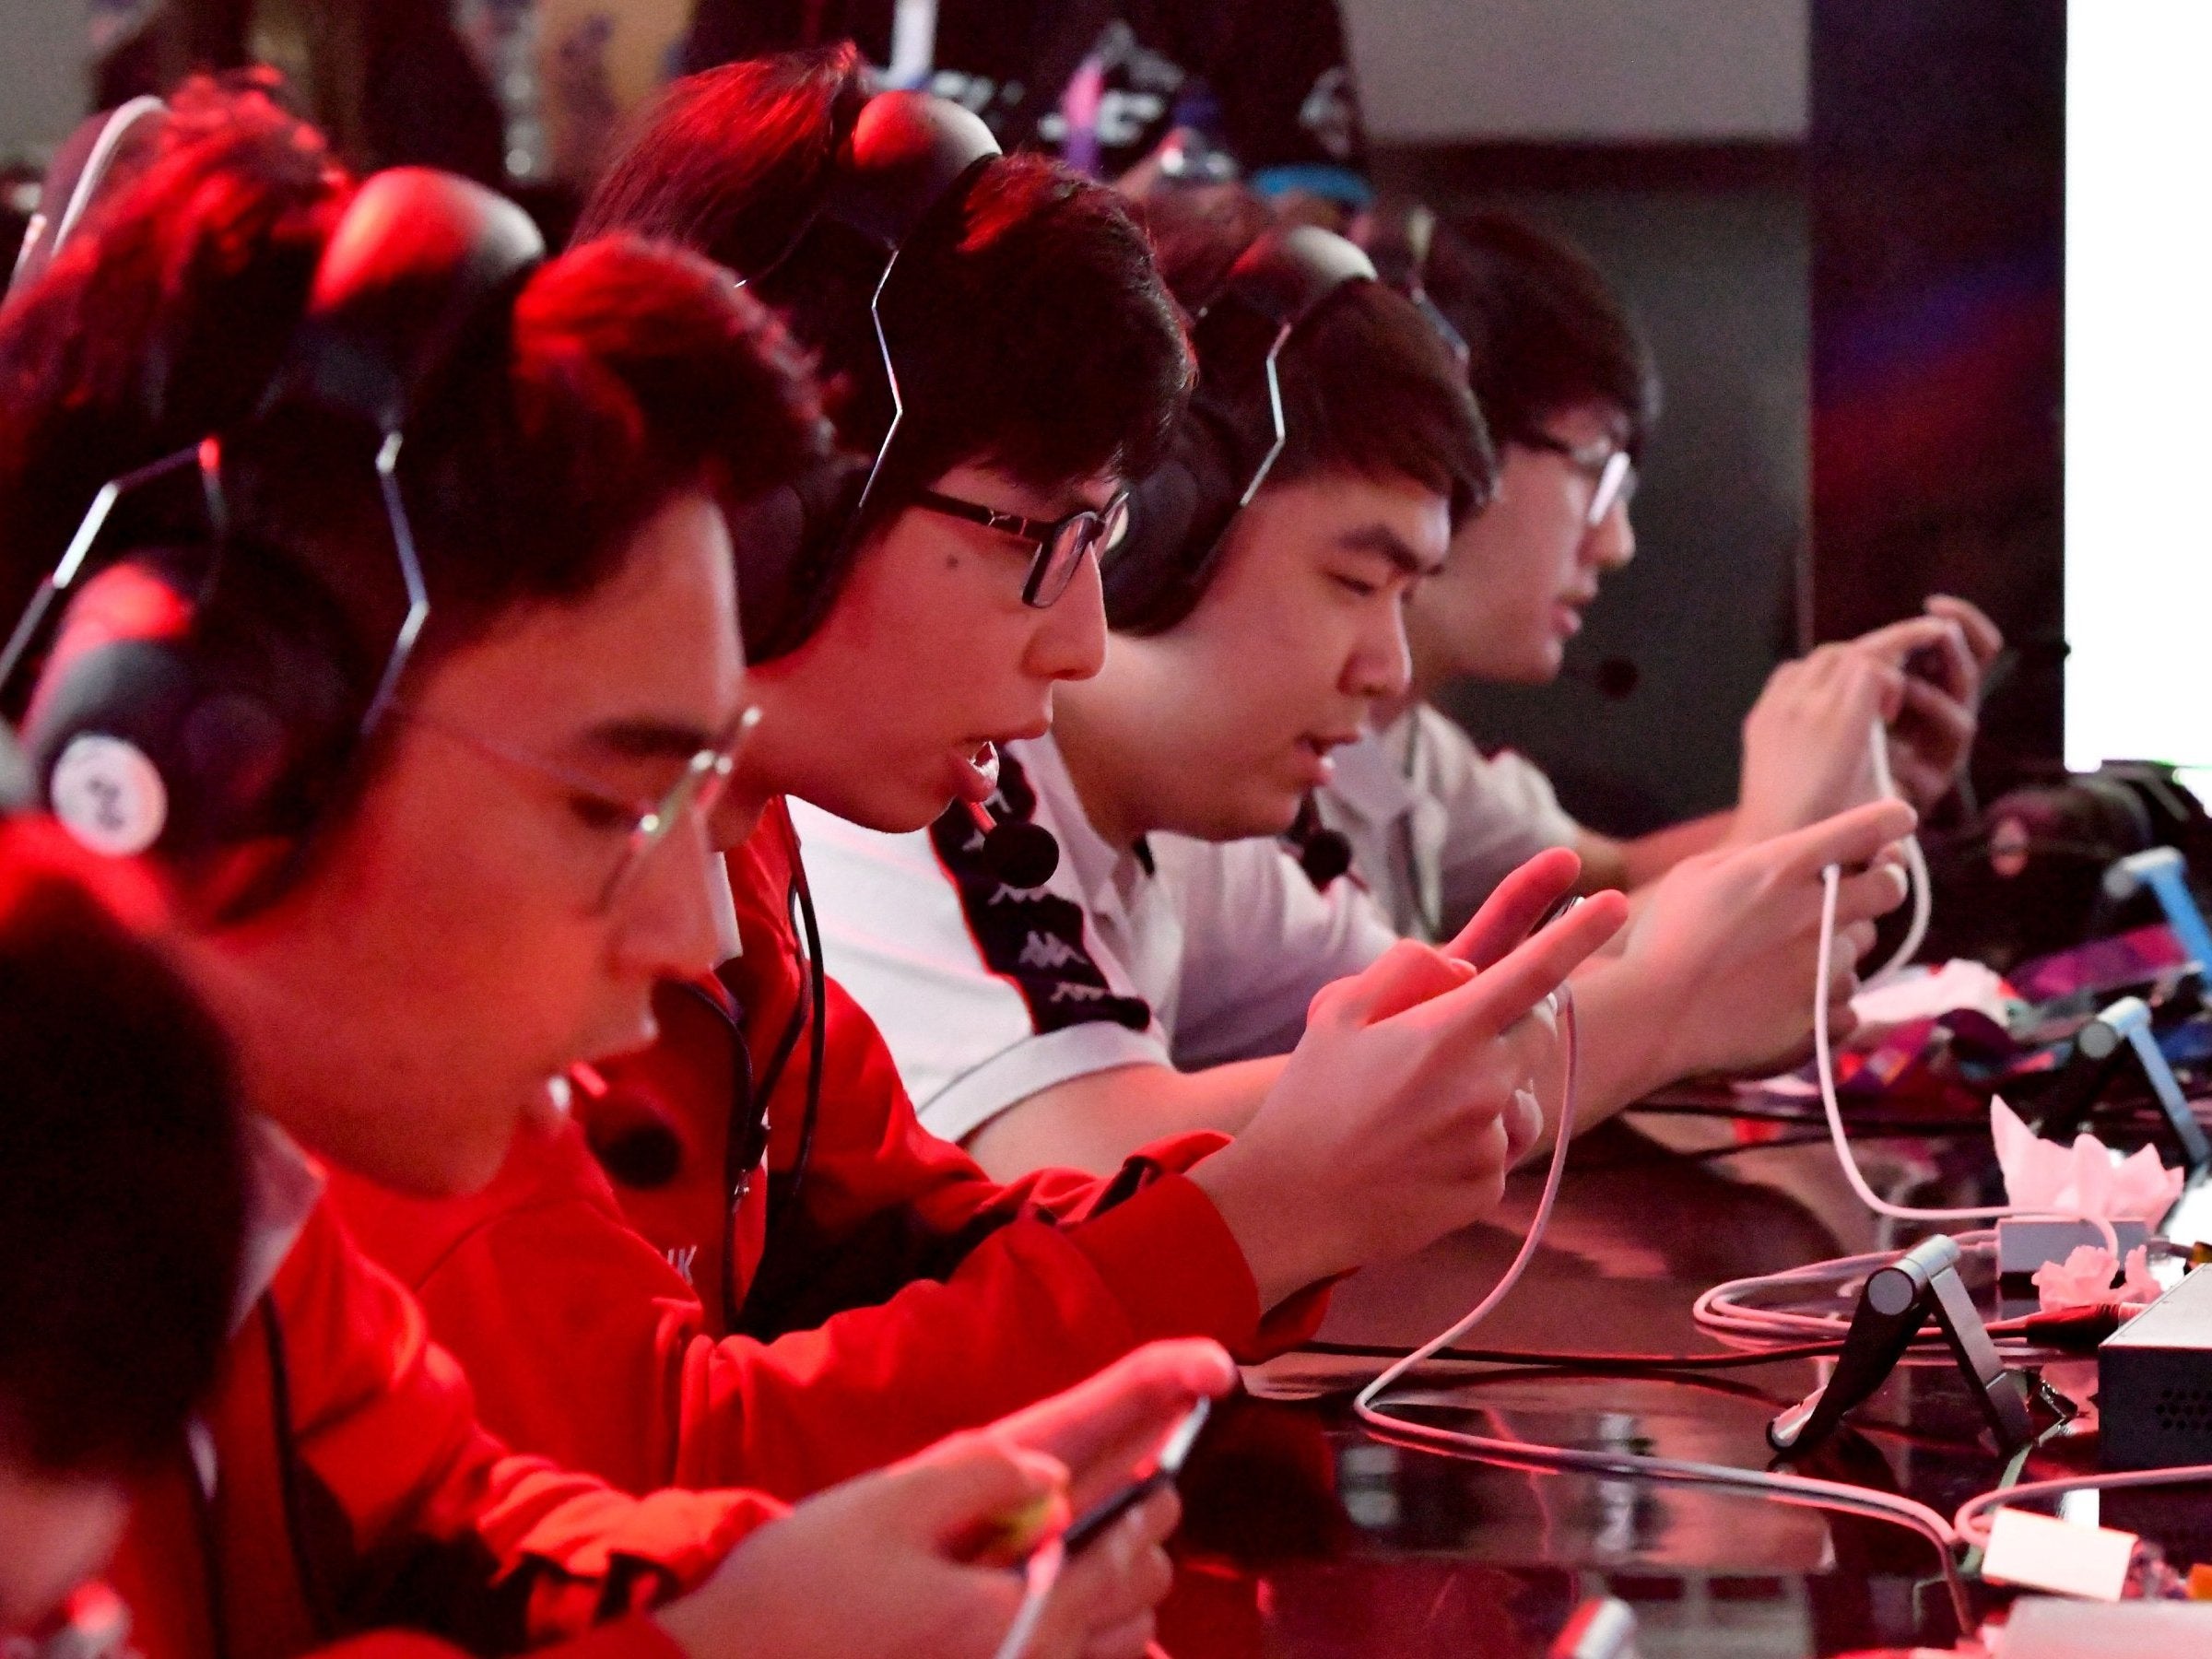 Esports were included at the Asian Games for the first time